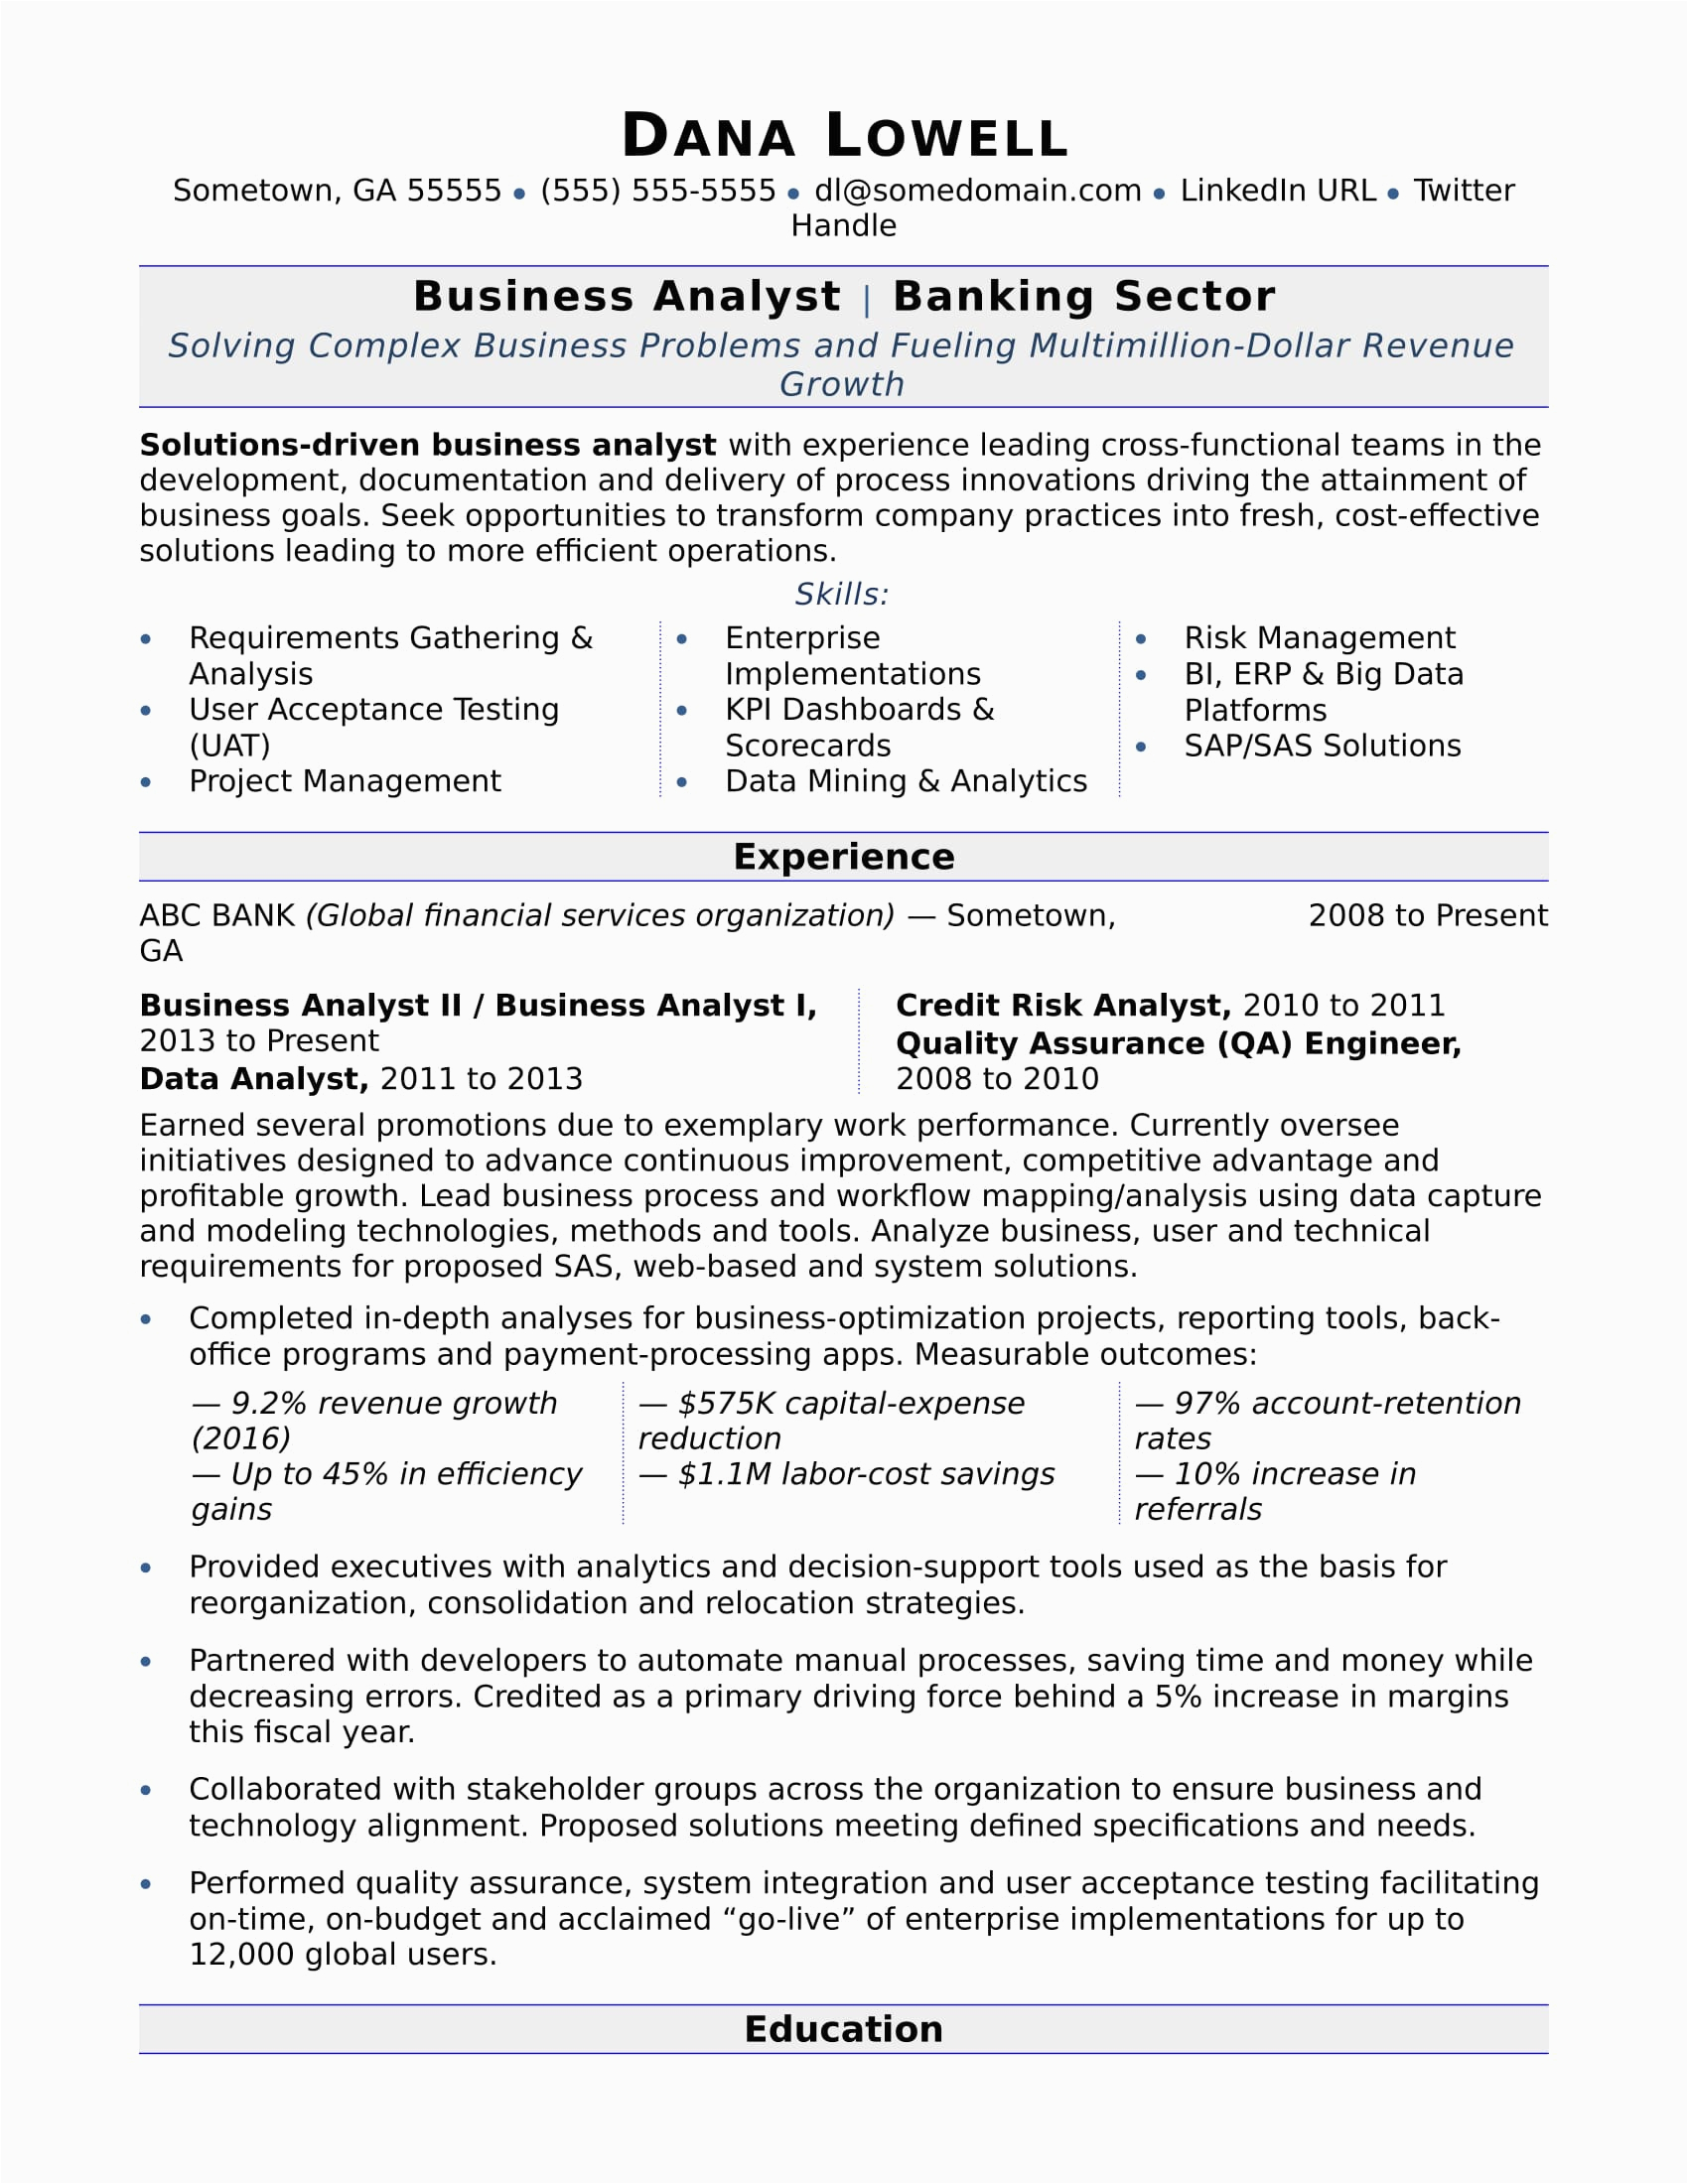 Sample Resume for It Business Analyst Position Analyst Job Resume